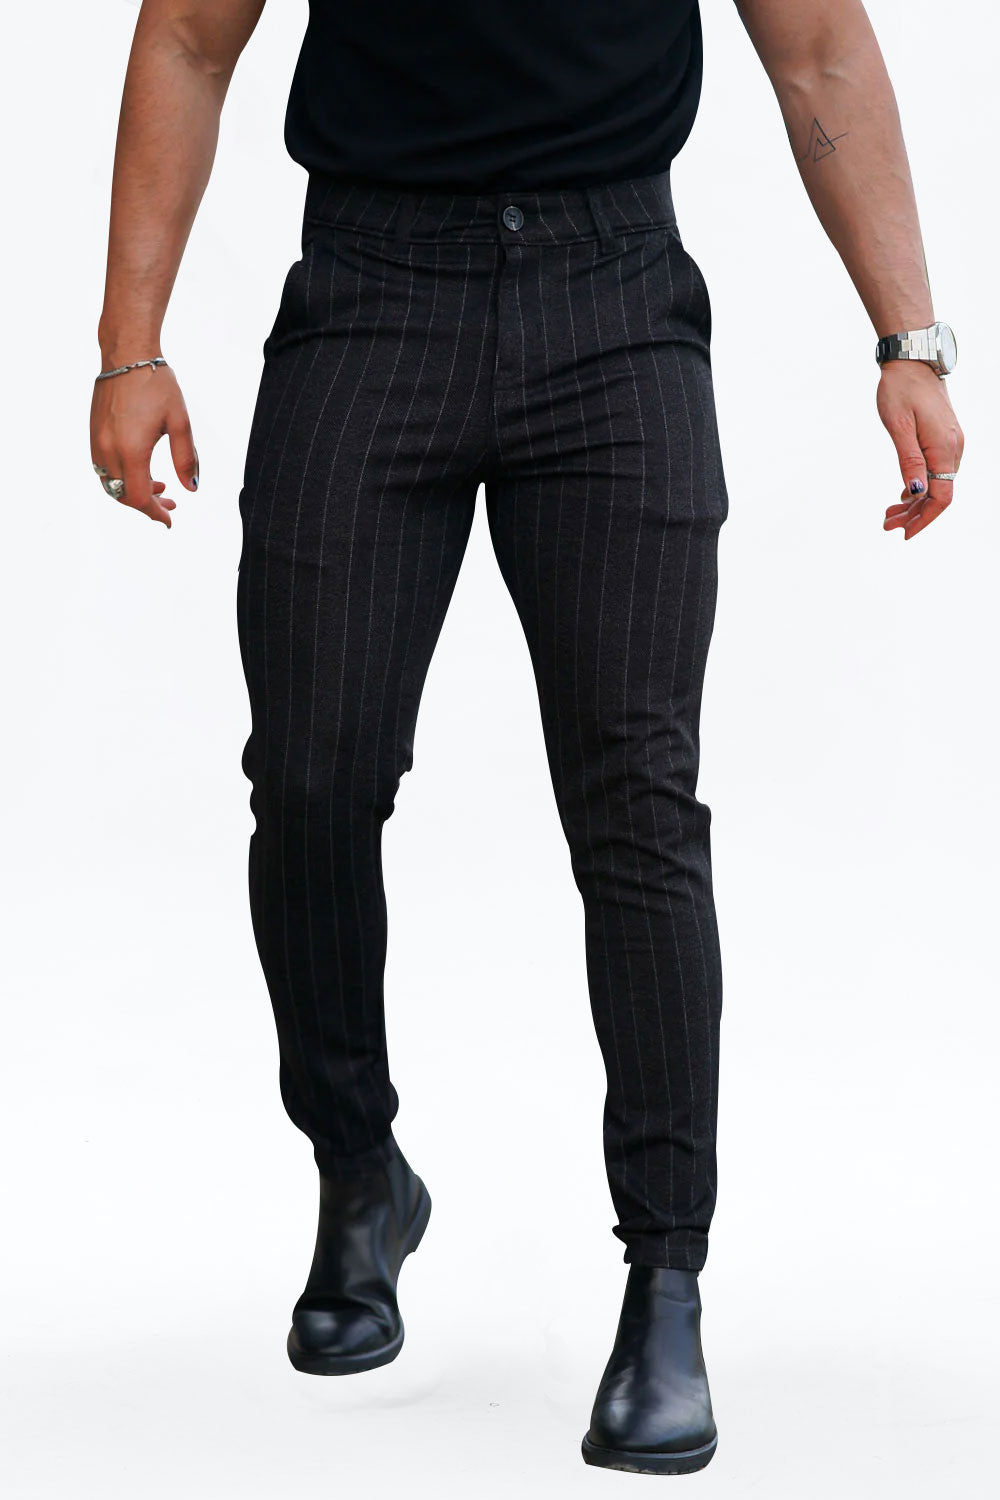 Gingtto Black Vertical Stripes Stylish Casual Chinos With Good Stretch